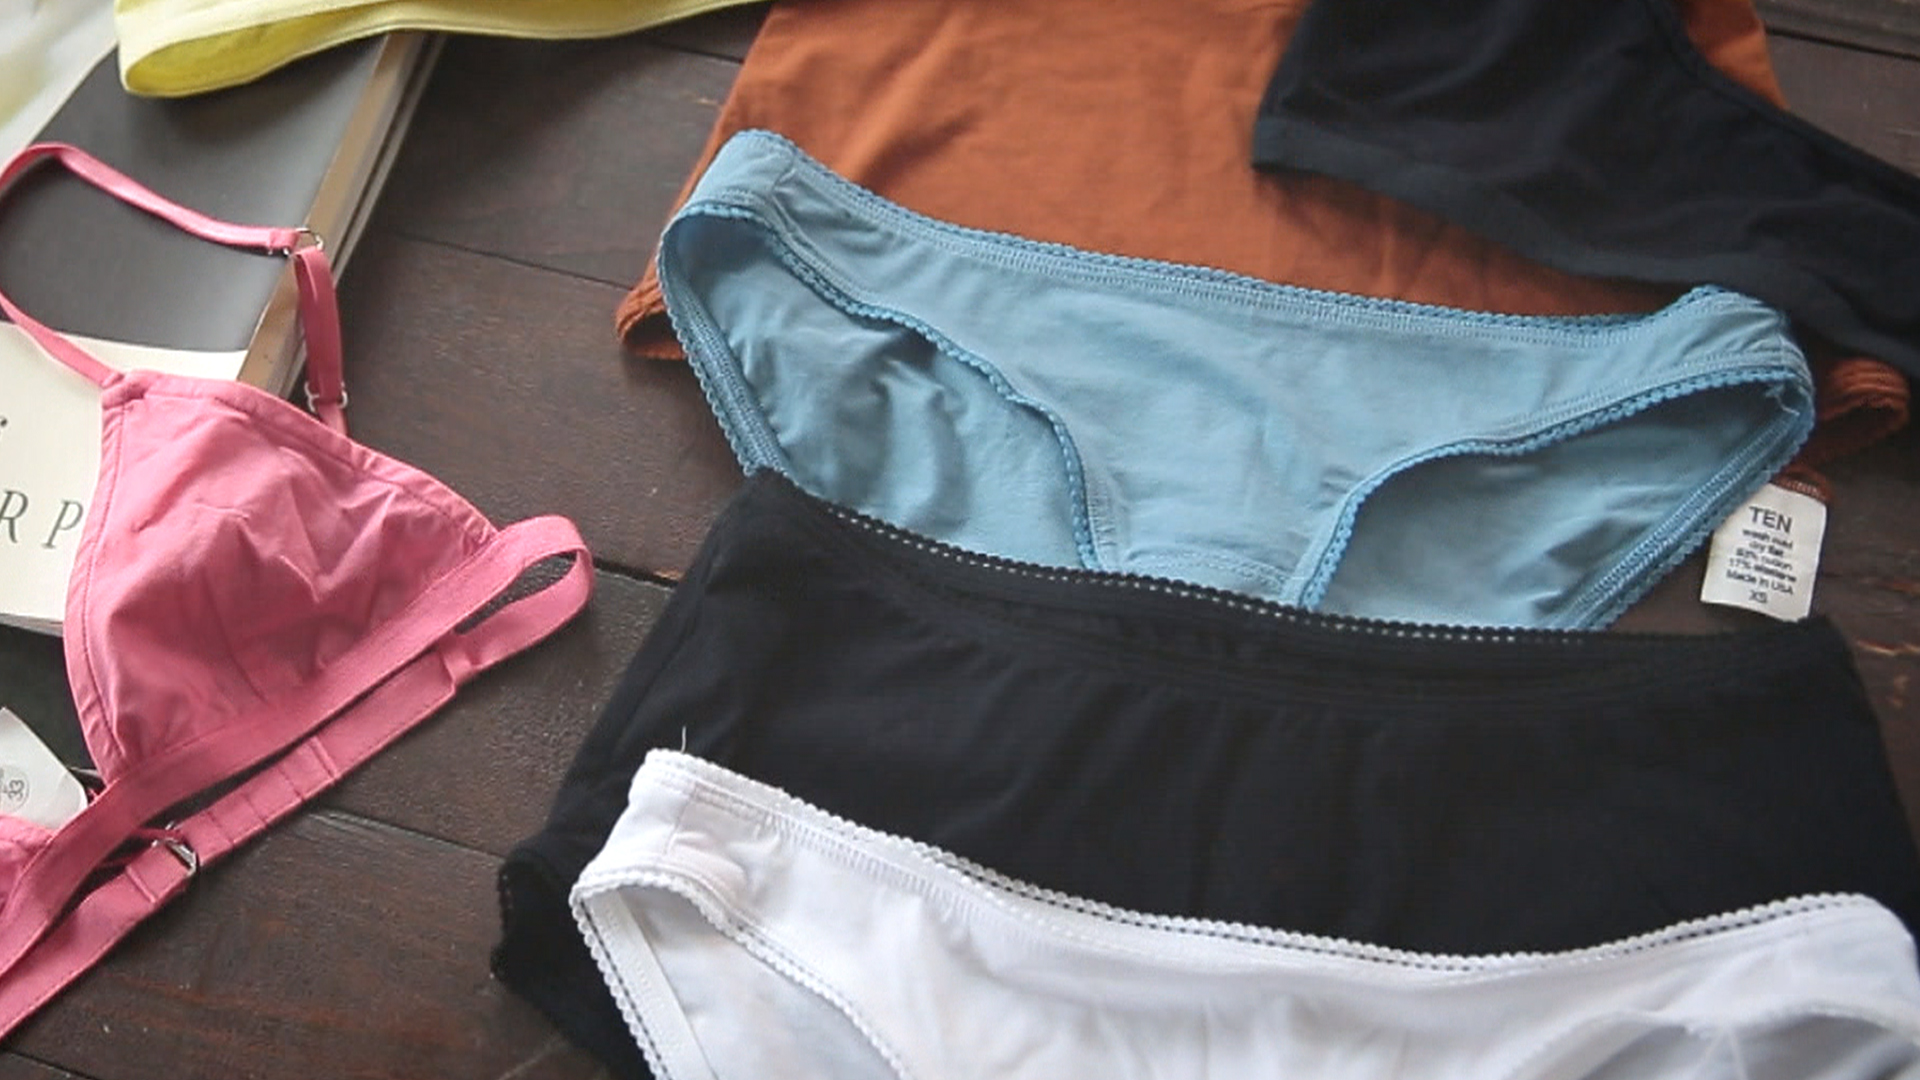 Granny Panties Are Back. Are They Better for Your Health?